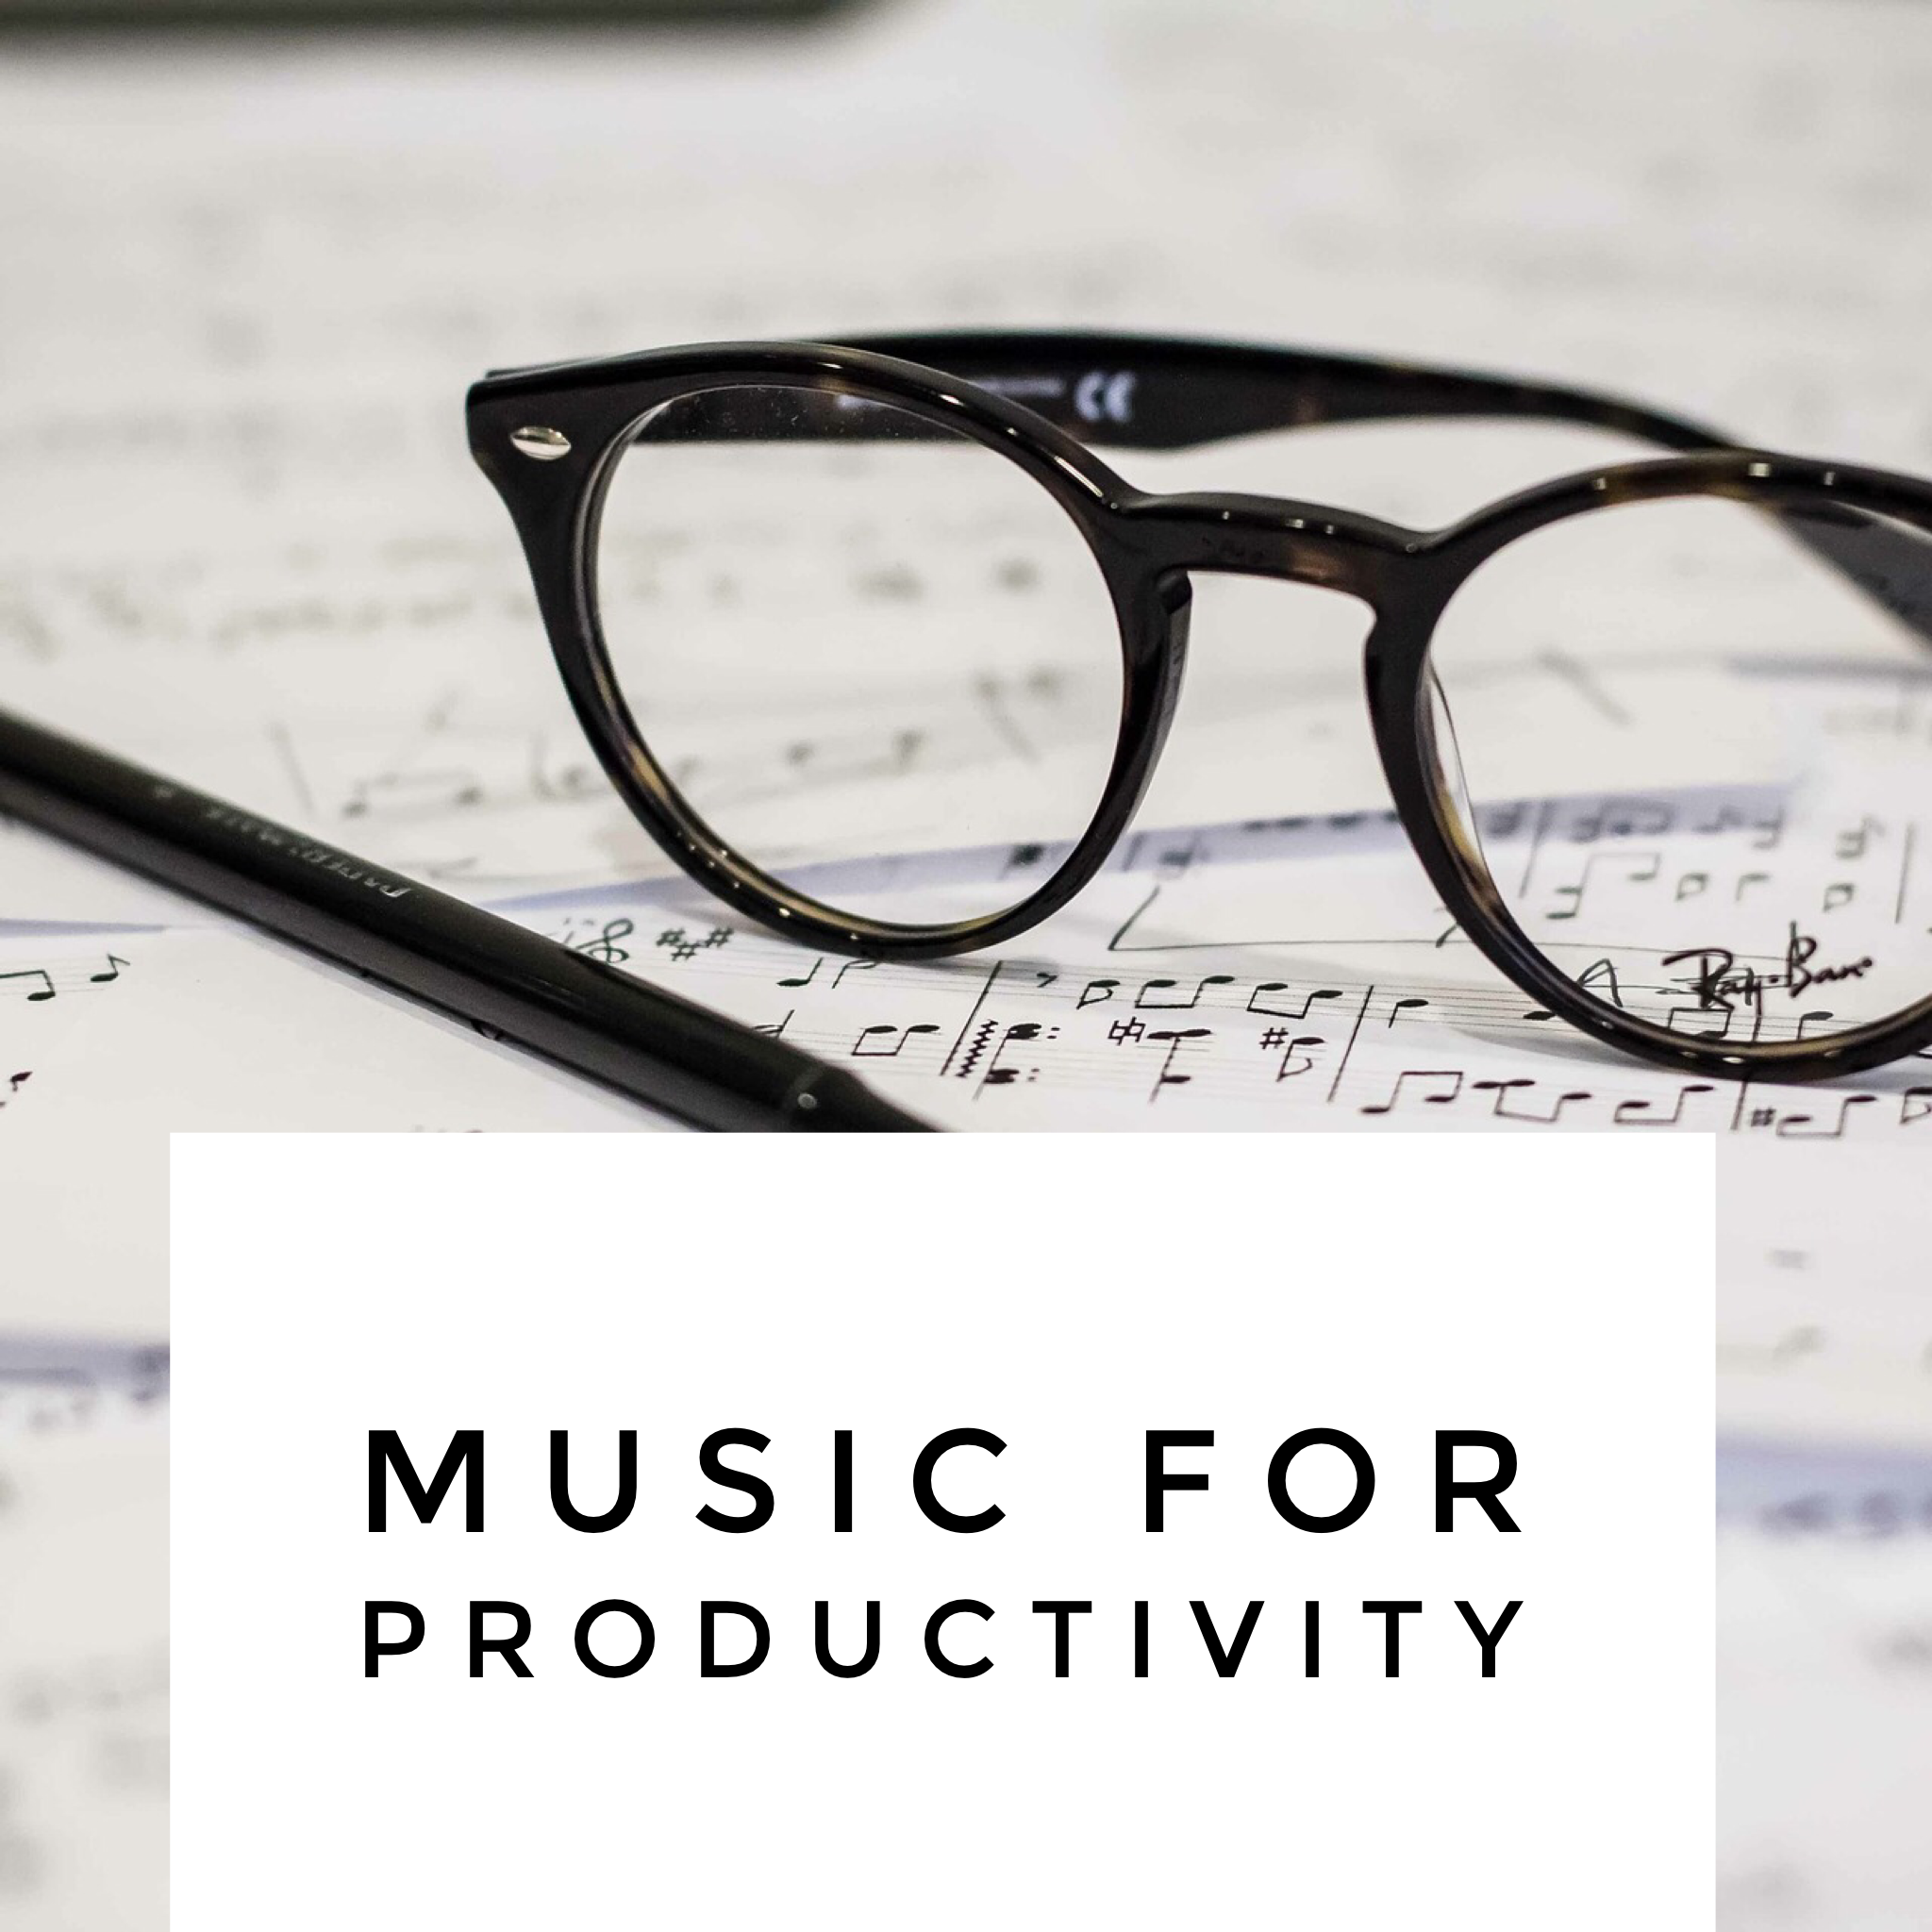 Increase Productivity Course - Day 3 - Music for Productivity